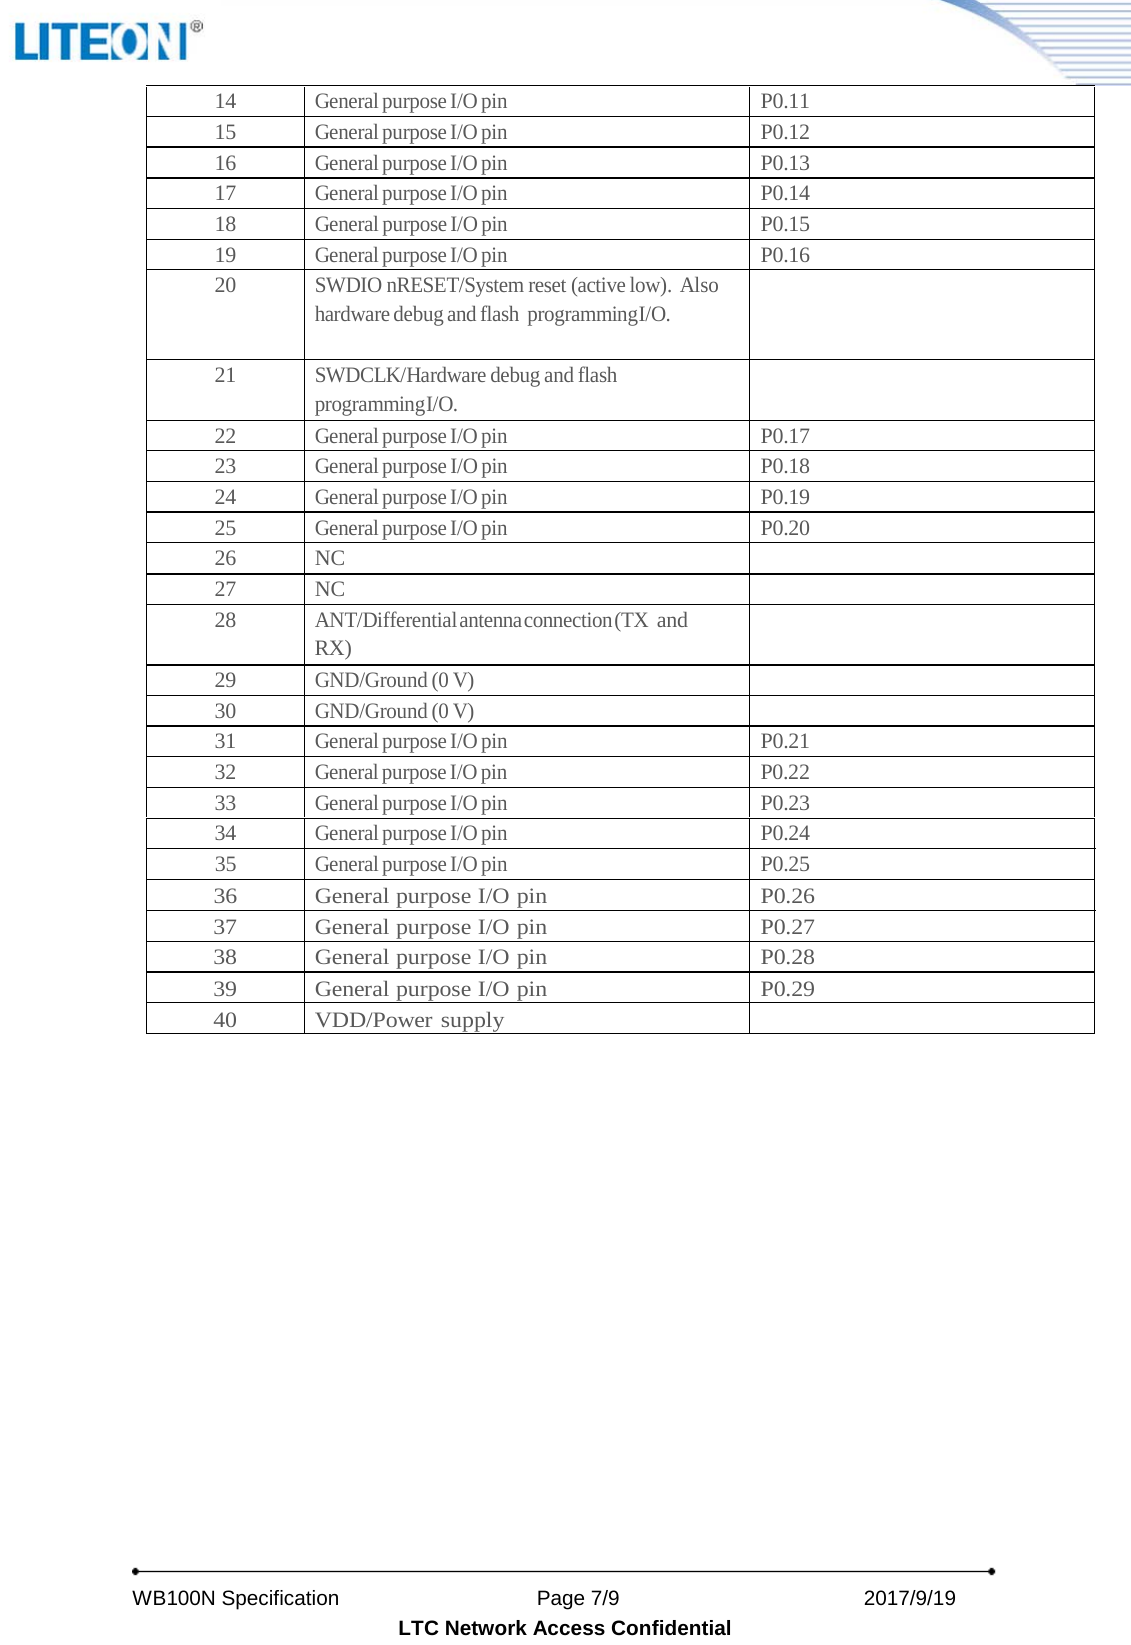   WB100N Specification                    Page 7/9                          2017/9/19   LTC Network Access Confidential 14 General purpose I/O pin P0.11 15 General purpose I/O pin P0.12 16 General purpose I/O pin P0.13 17 General purpose I/O pin P0.14 18 General purpose I/O pin P0.15 19 General purpose I/O pin P0.16 20 SWDIO nRESET/System reset (active low). Also hardware debug and flash programming I/O.  21 SWDCLK/Hardware debug and flash programming I/O.  22 General purpose I/O pin P0.17 23 General purpose I/O pin P0.18 24 General purpose I/O pin P0.19 25 General purpose I/O pin P0.20 26 NC  27 NC  28 ANT/Differential antenna connection (TX and RX)  29 GND/Ground (0 V)  30 GND/Ground (0 V)  31 General purpose I/O pin P0.21 32 General purpose I/O pin P0.22 33 General purpose I/O pin P0.23 34 General purpose I/O pin P0.24 35 General purpose I/O pin P0.25 36 General purpose I/O pin P0.26 37 General purpose I/O pin P0.27 38 General purpose I/O pin P0.28 39 General purpose I/O pin P0.29 40 VDD/Power supply    